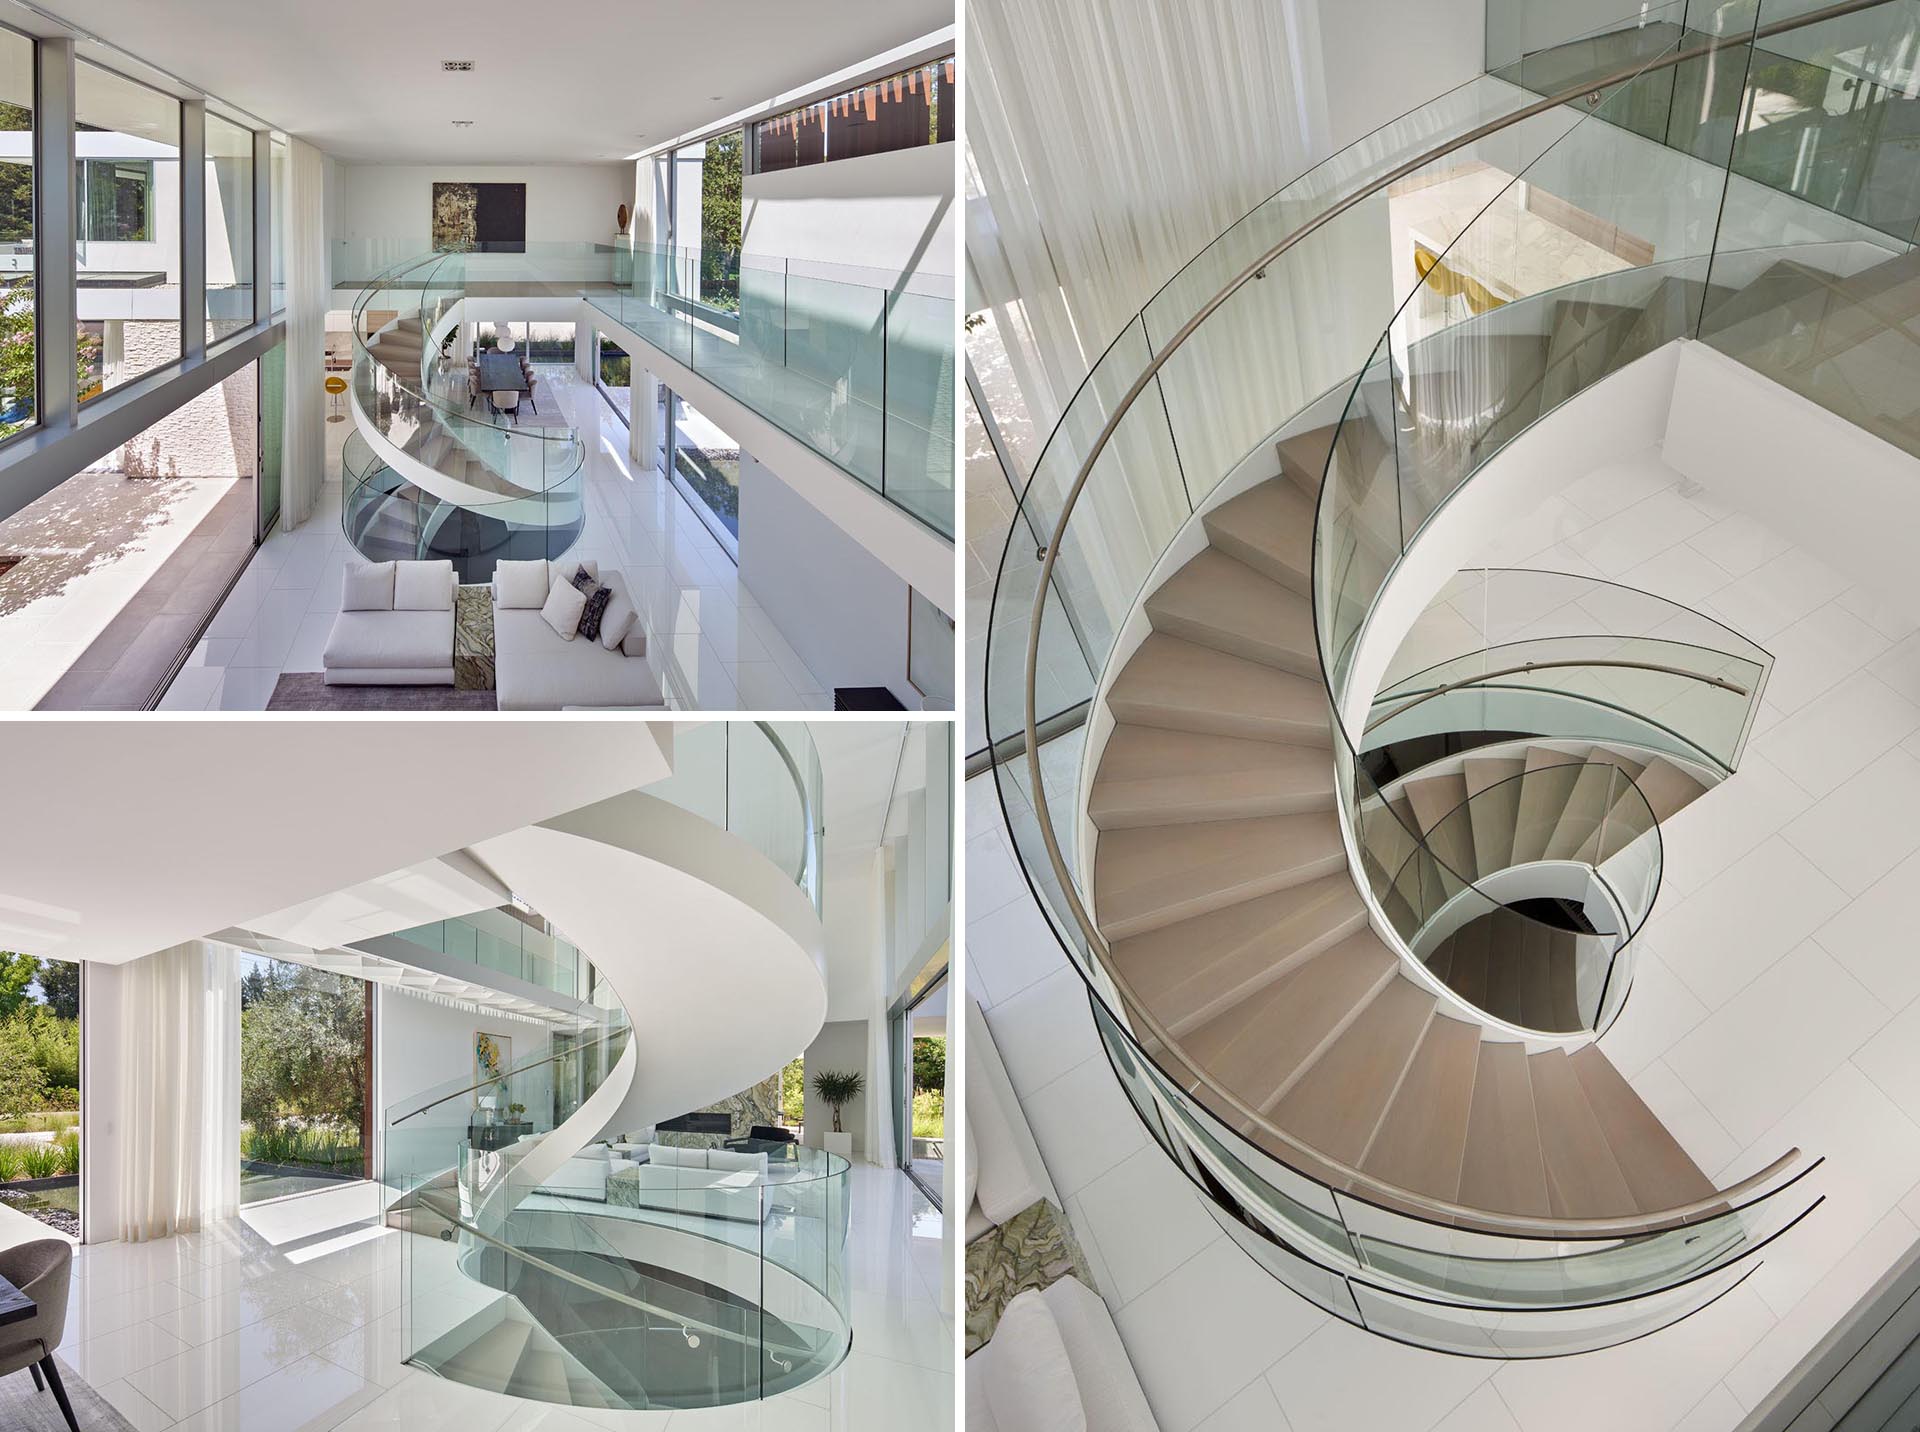 This custom designed spiral staircase includes glass handrails and a steel frame that complements the surrounding white walls.